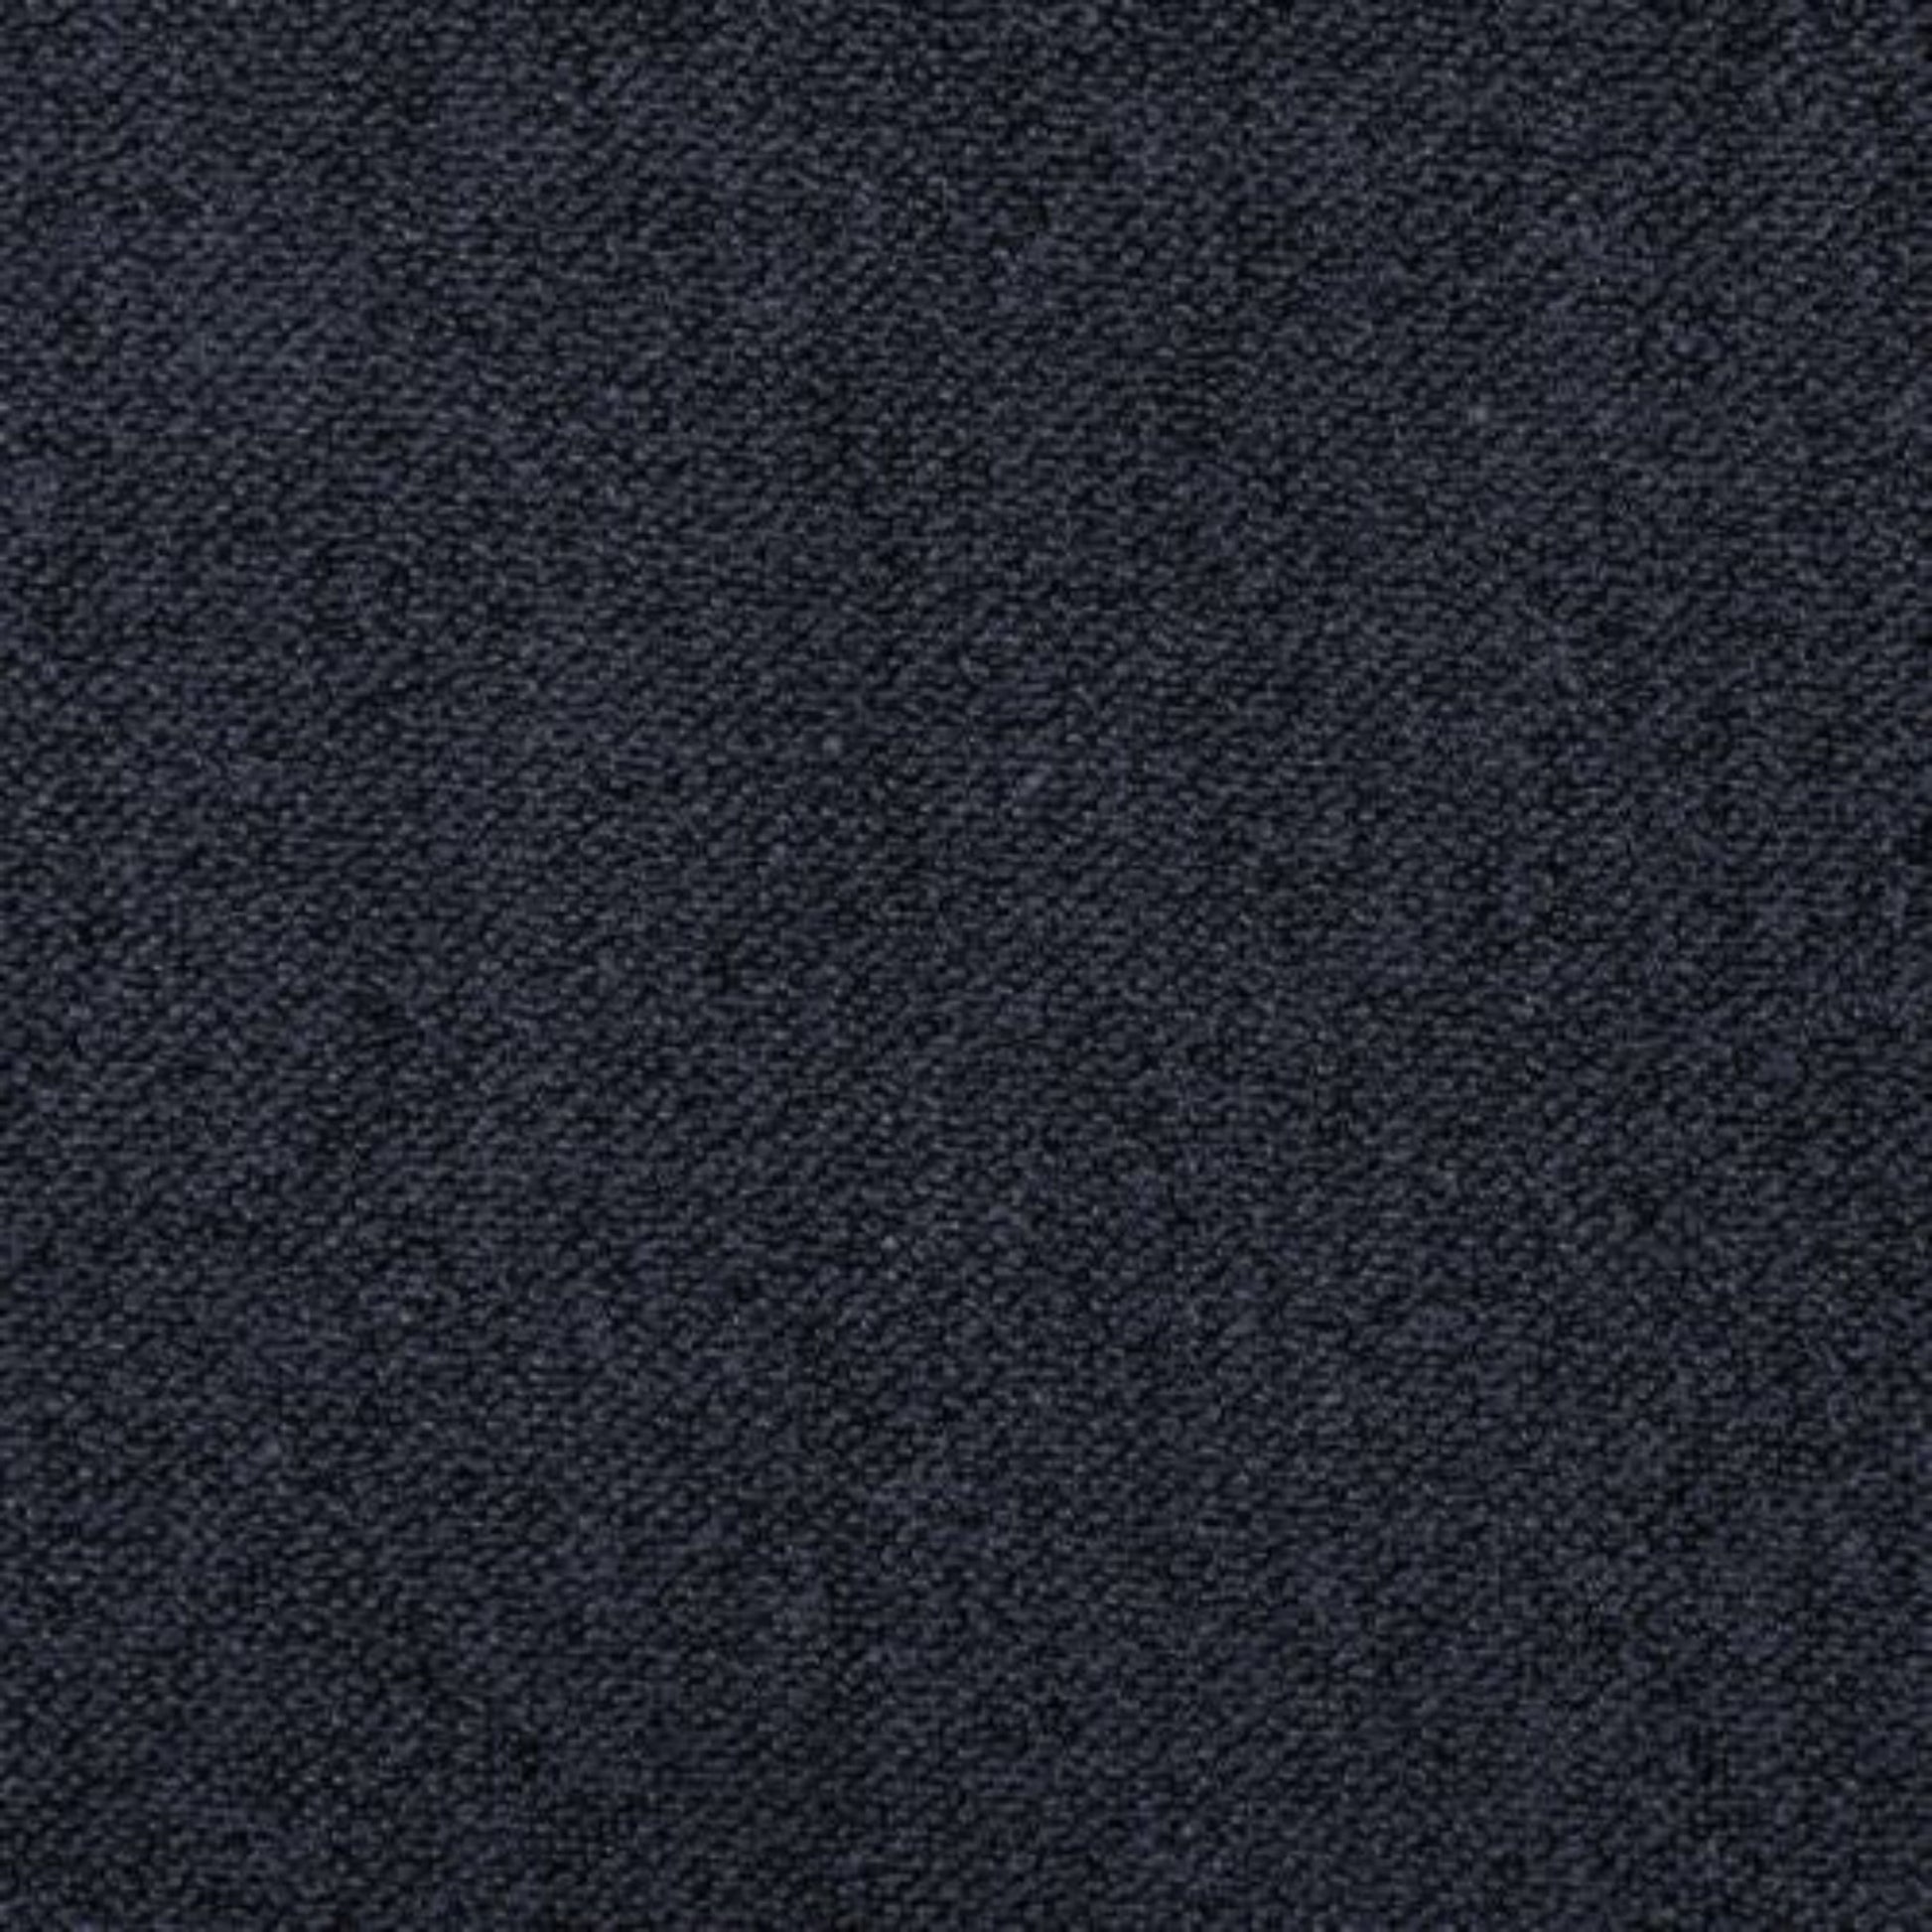 Colby dark blue polyester blend 3 seat fabric sofa